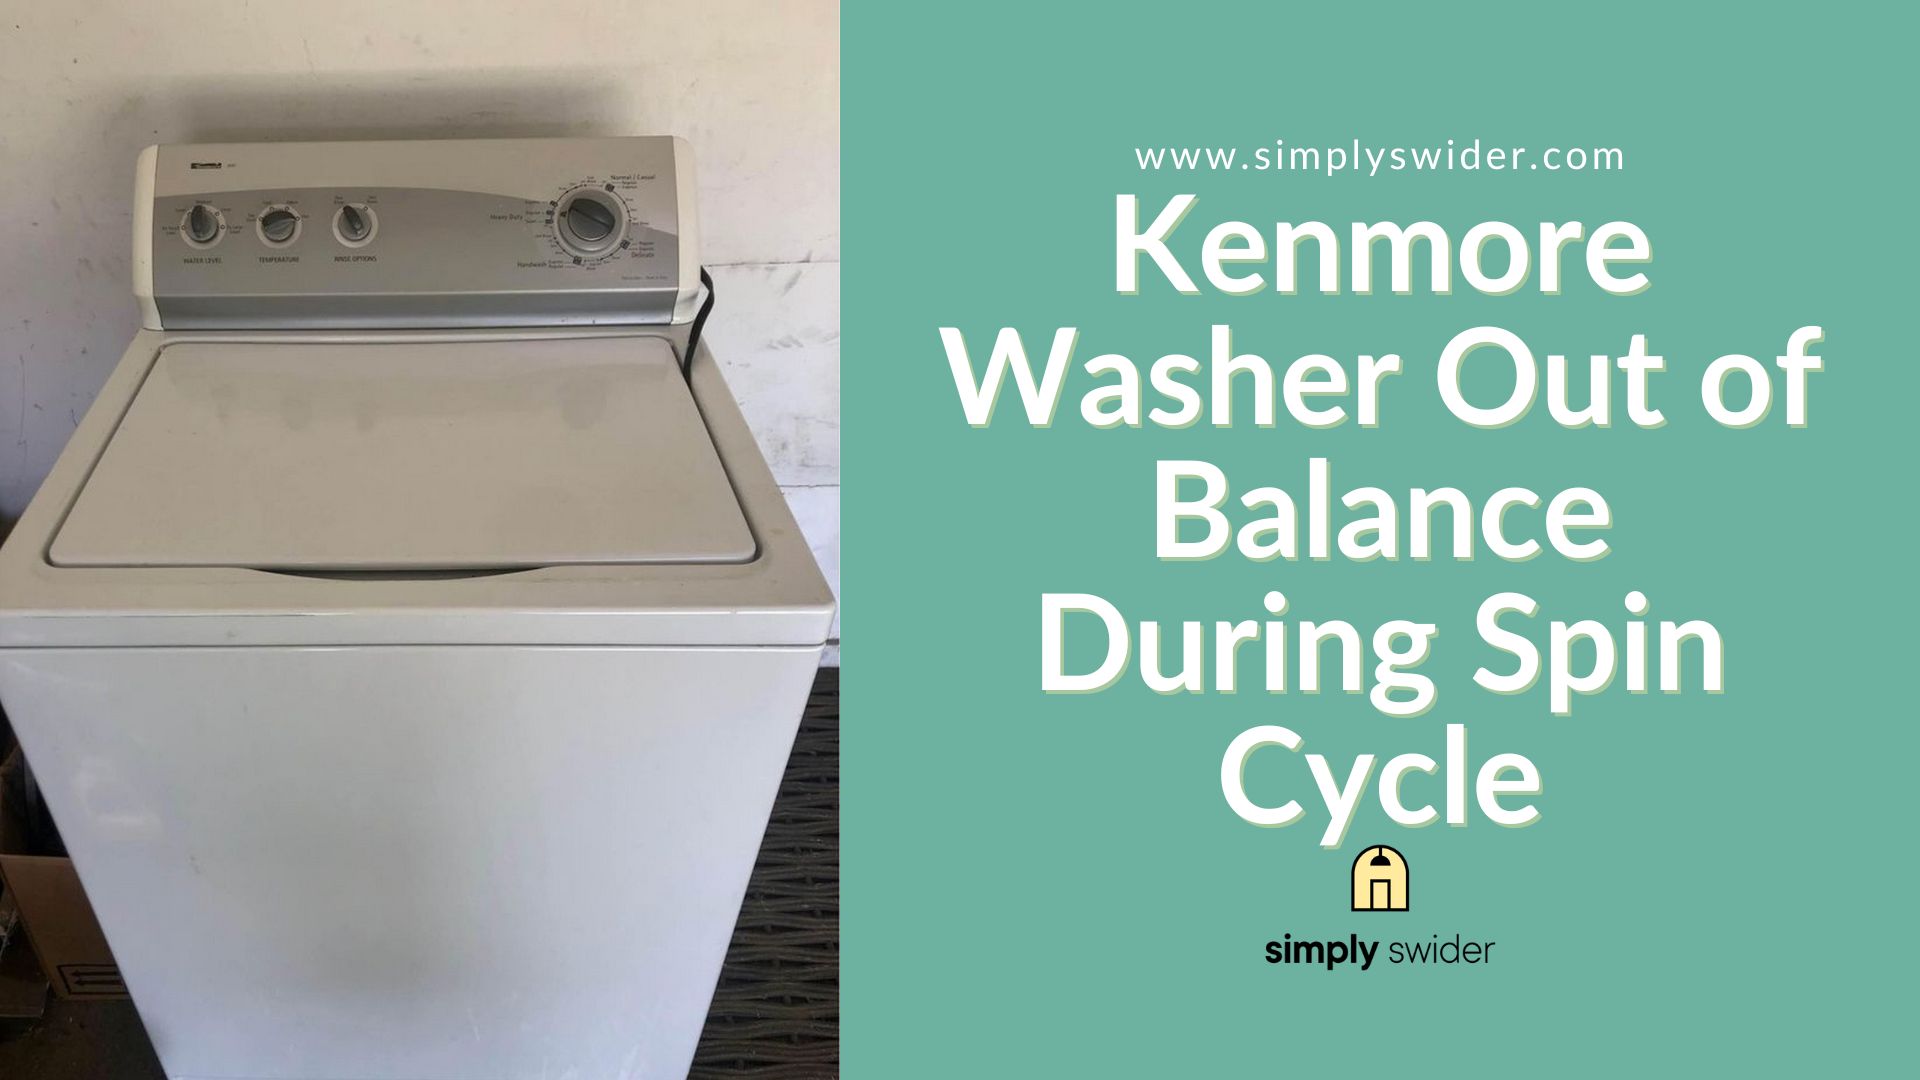 Kenmore Washer Out of Balance During Spin Cycle